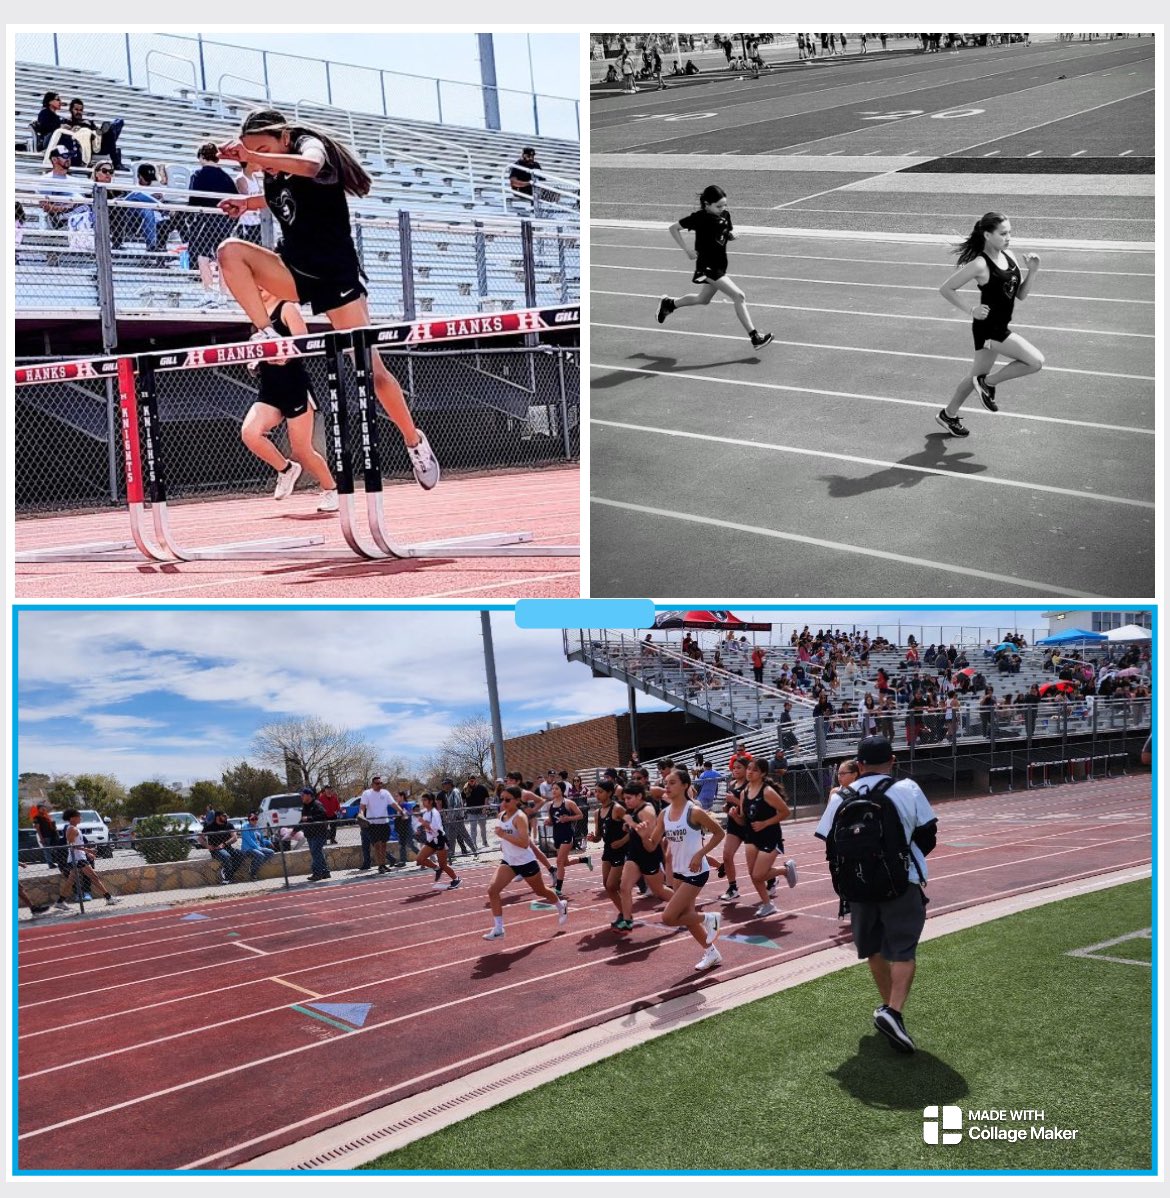 Great competition, great team work and great atmosphere. Cavalier Track Invitation at Excalibur Stadium. Thank you Hanks for sharing the Kingdom #HanksStrong #StrongerUknighted #CavsNeverSurrender @JLucero_HMS @Lisa_Teach_7 @HanksMSTech @Coach_Veliz @HanksXC_TF